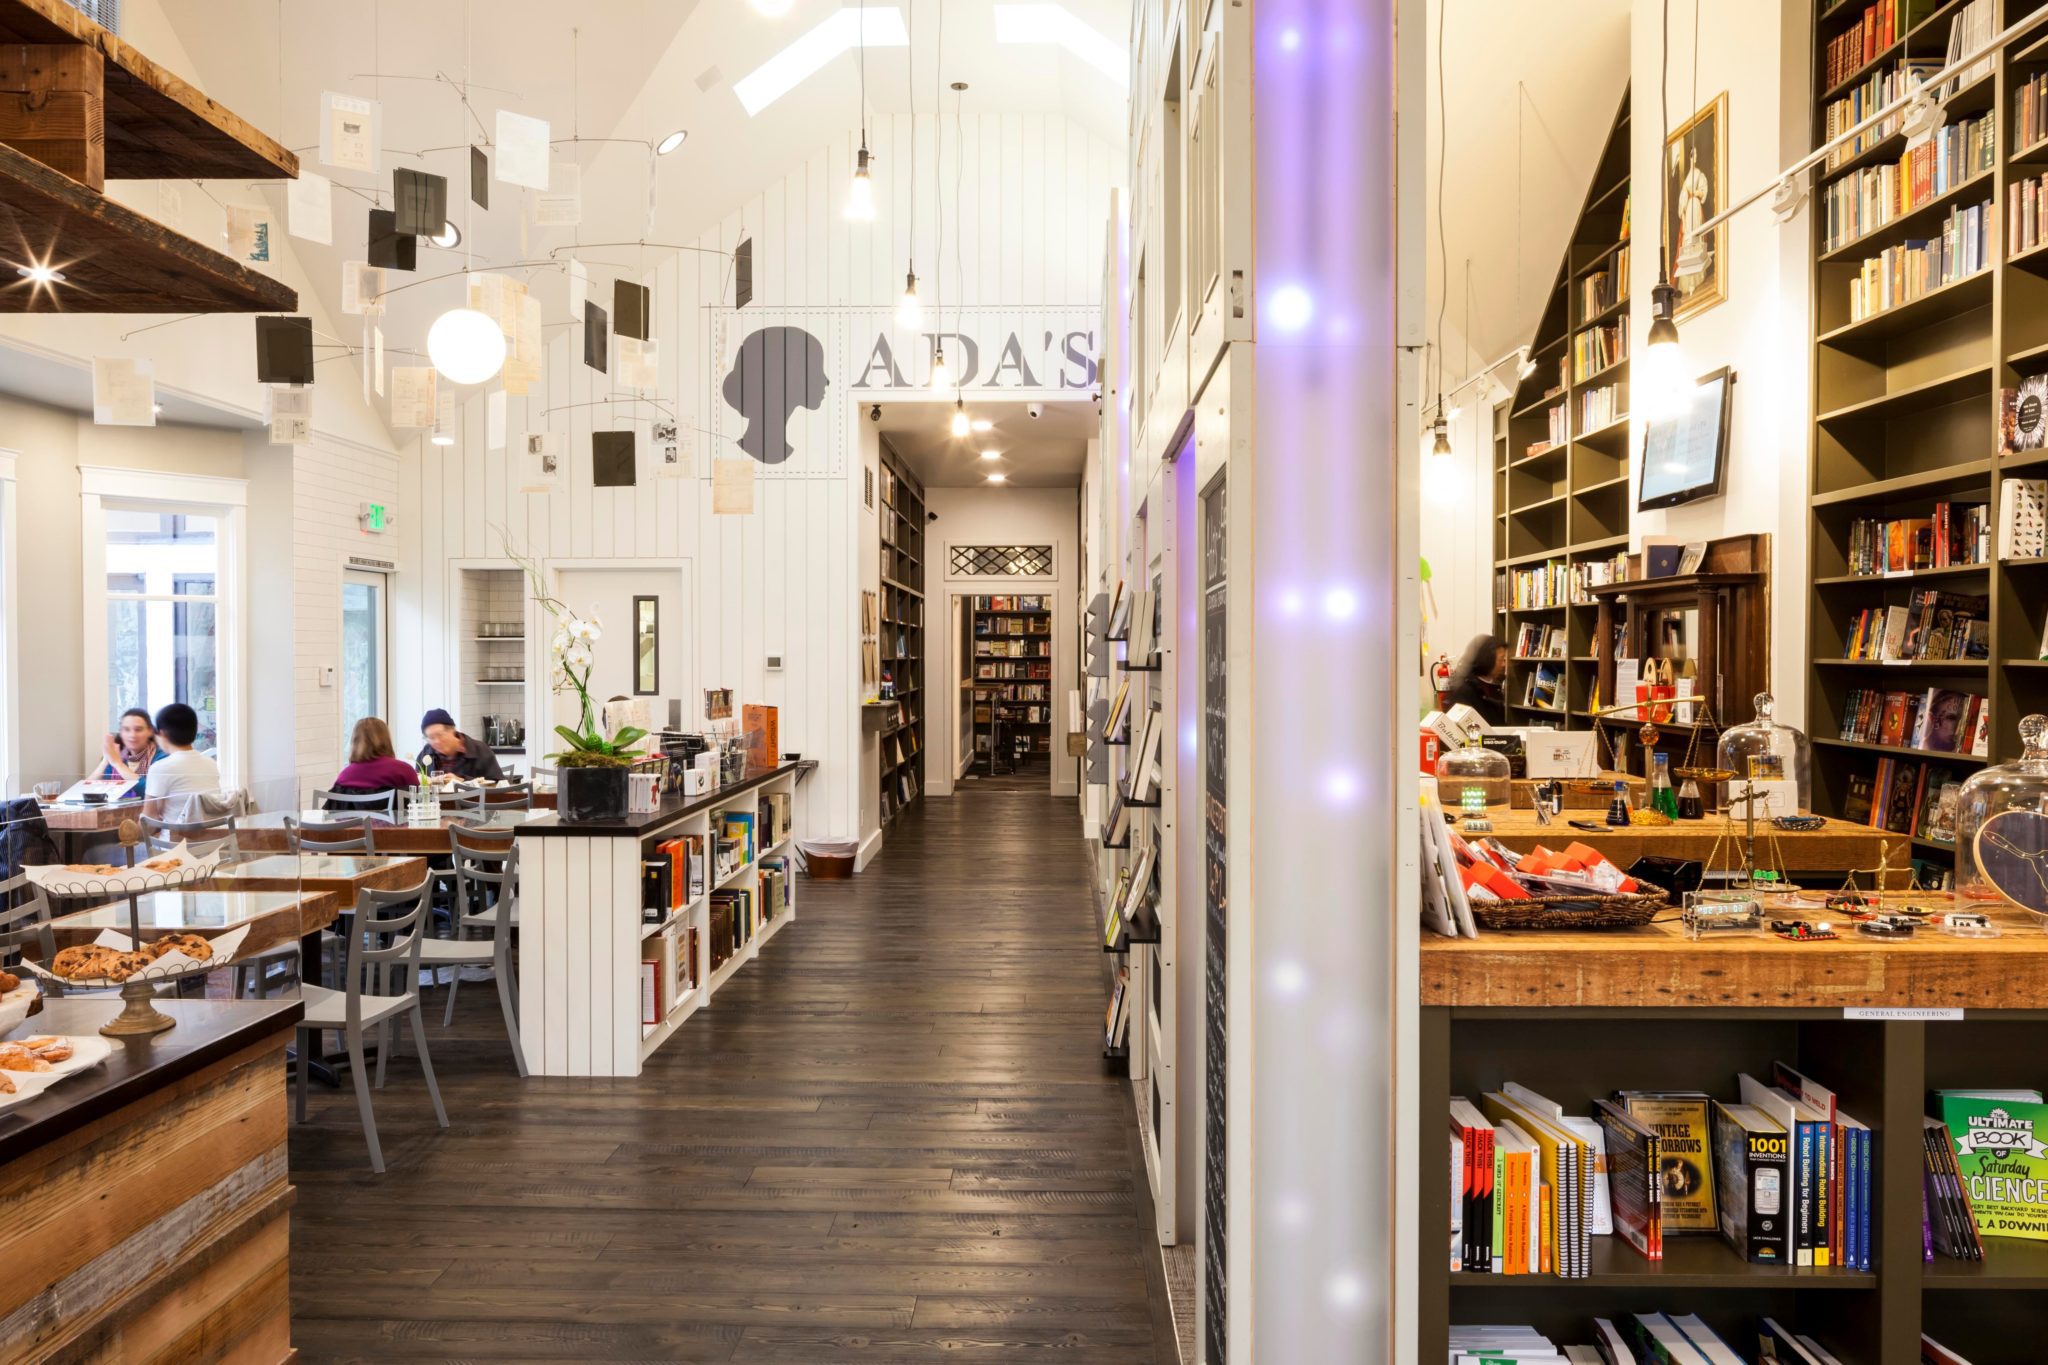 A view of Ada's bookstore, with shelves on the right and a customer seating area to the left.